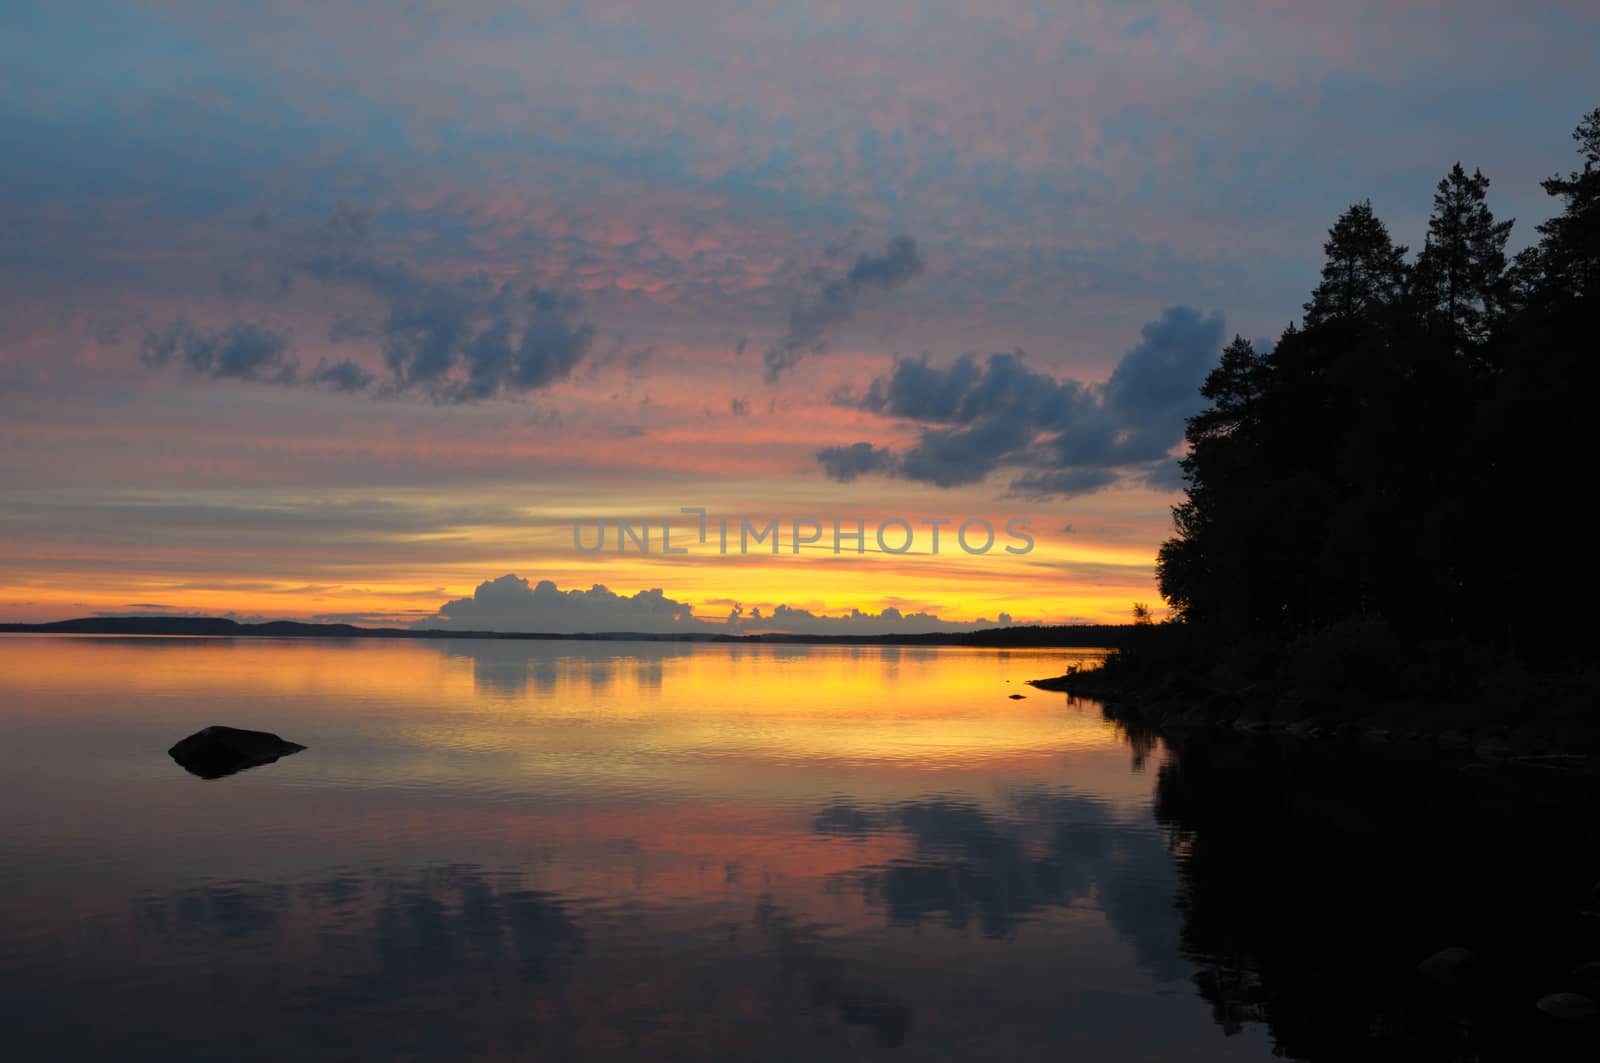 The final stage of a cloudy sunset above the huge lake in Karelia region